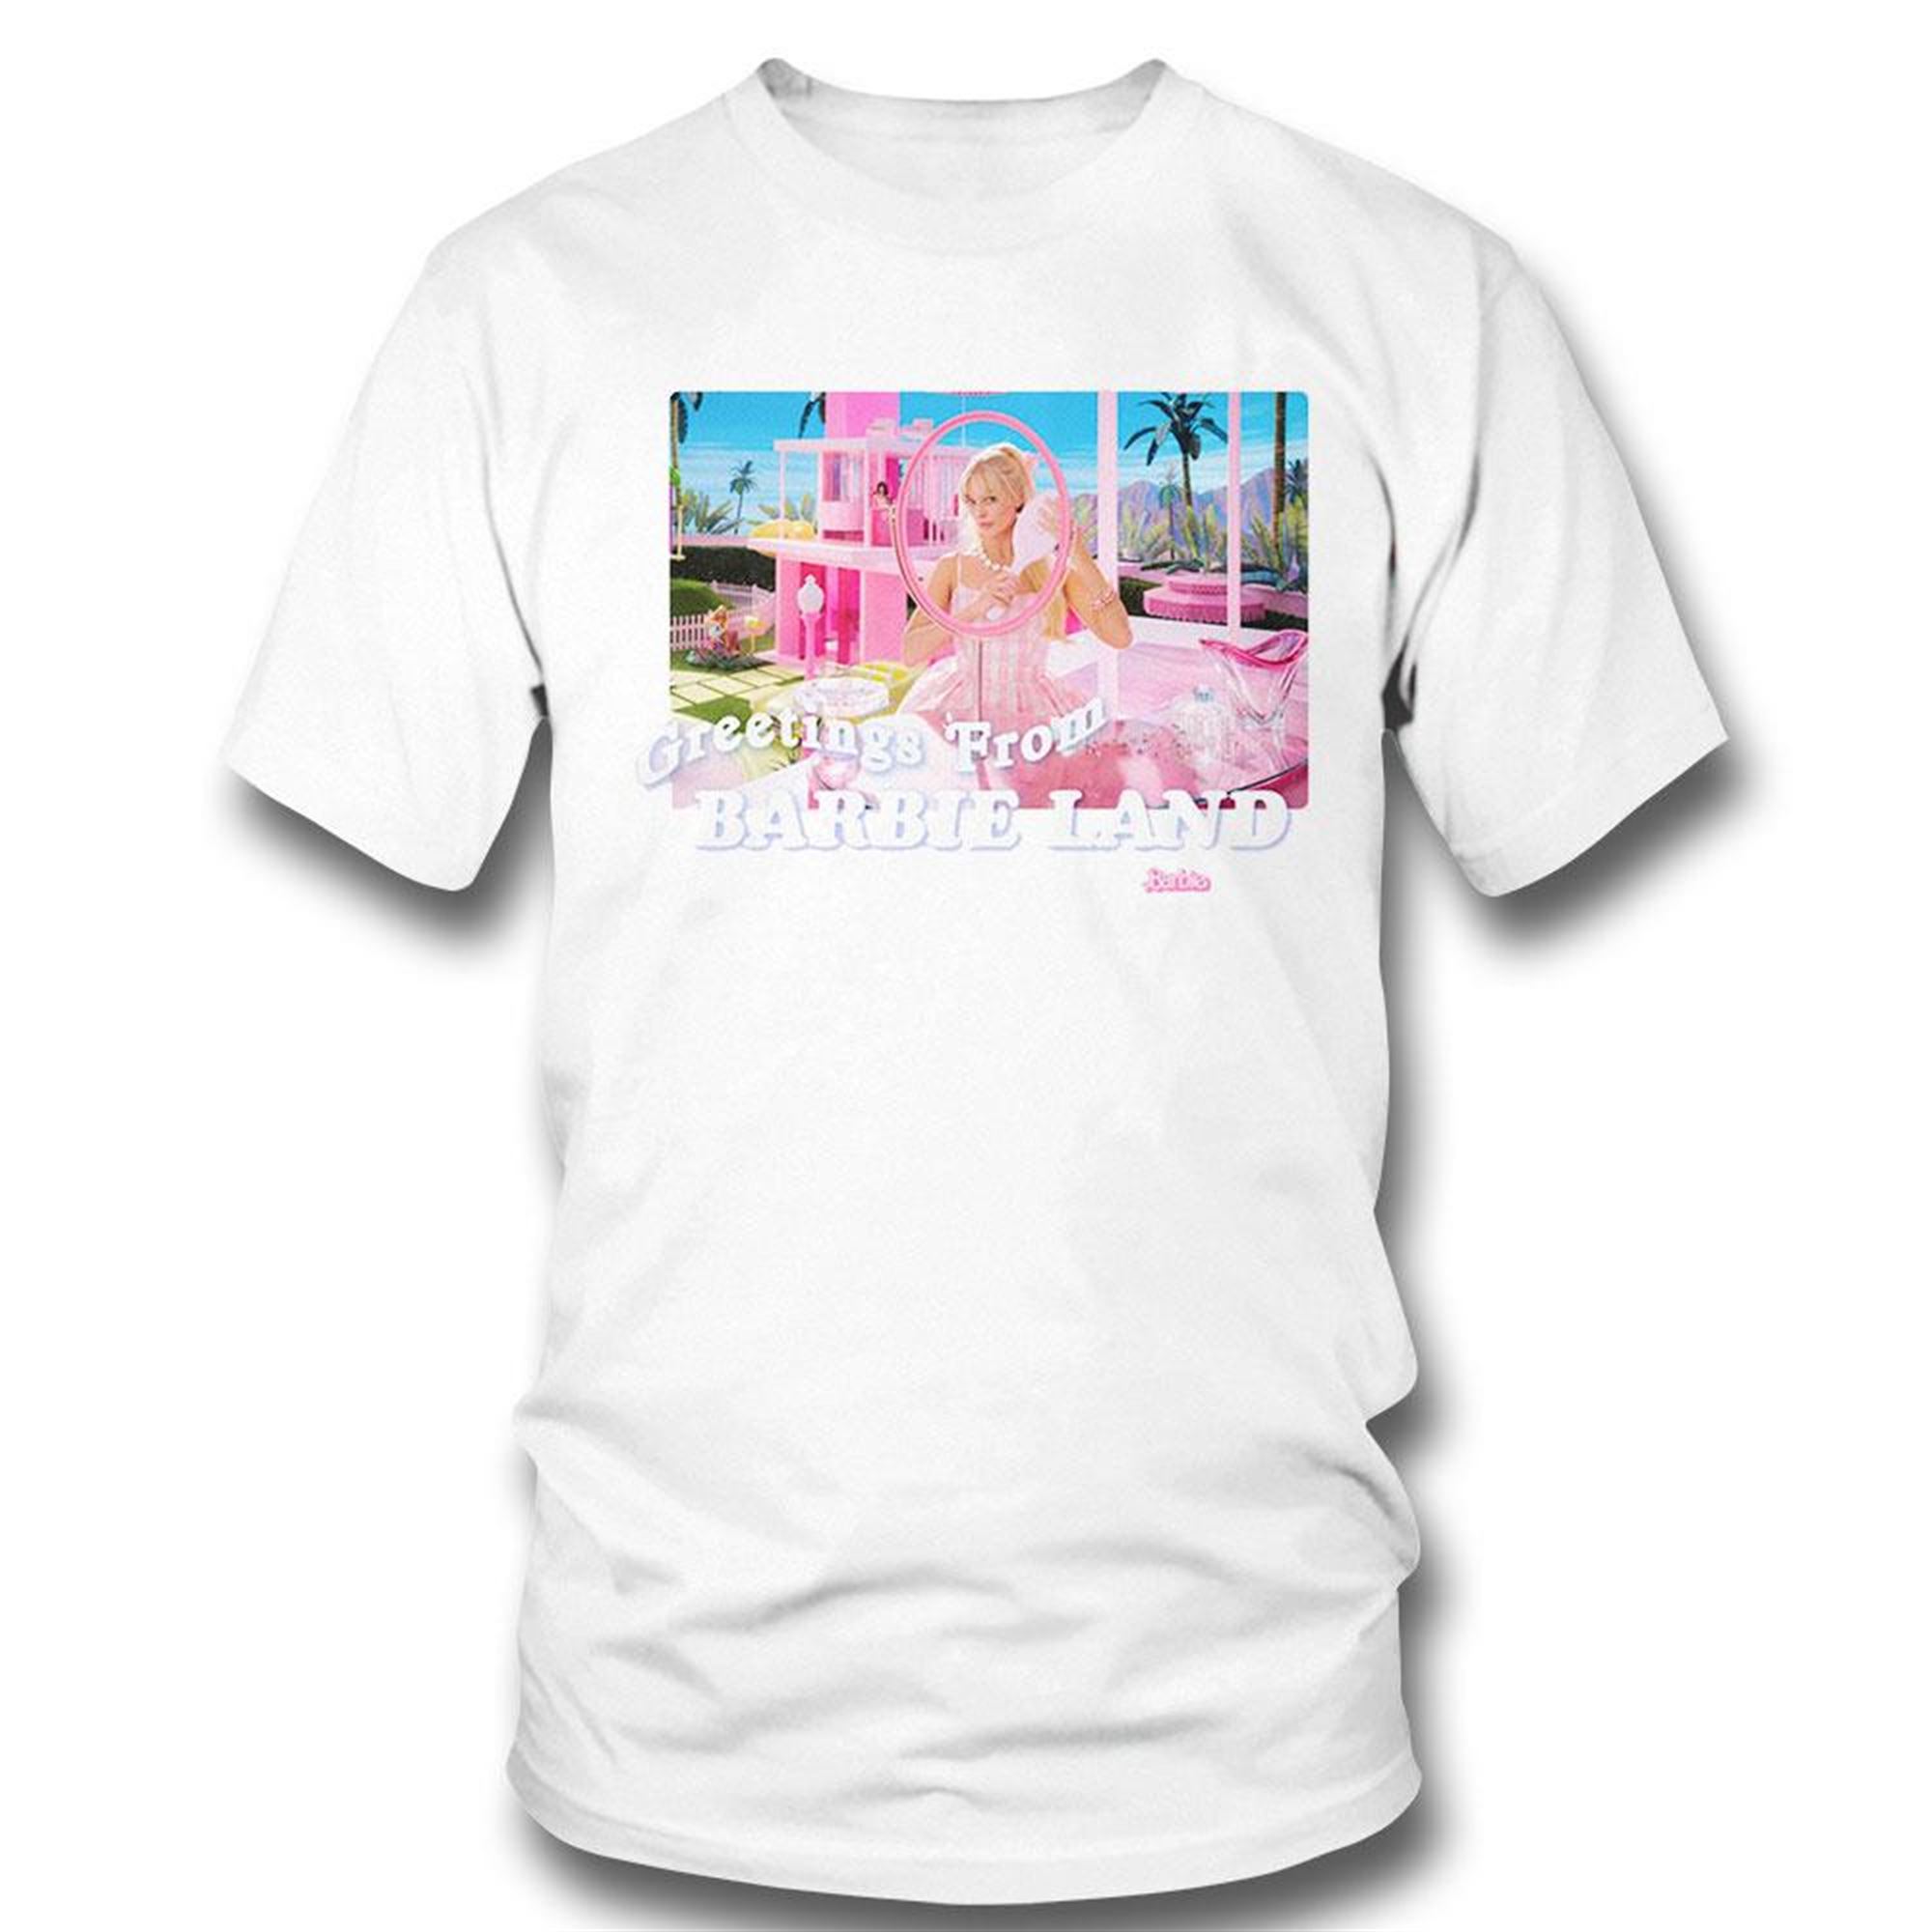 Greetings From Barbie Land T-shirt